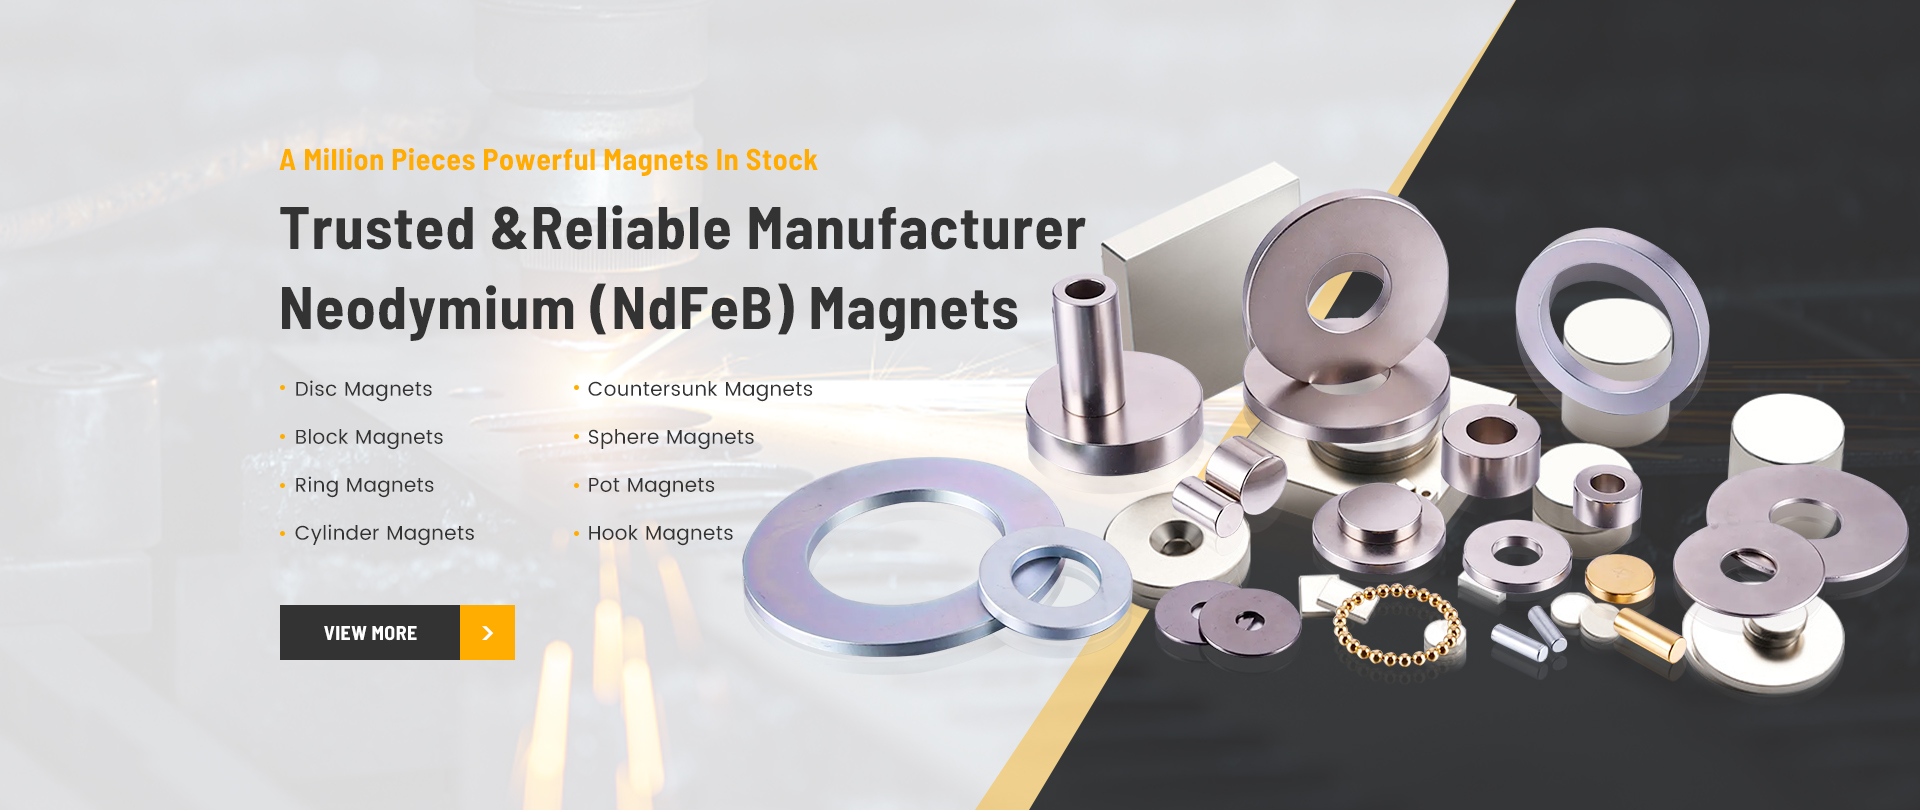 Trusted & Reliable Manufacturer Neodymium (NdFeB) Magnets